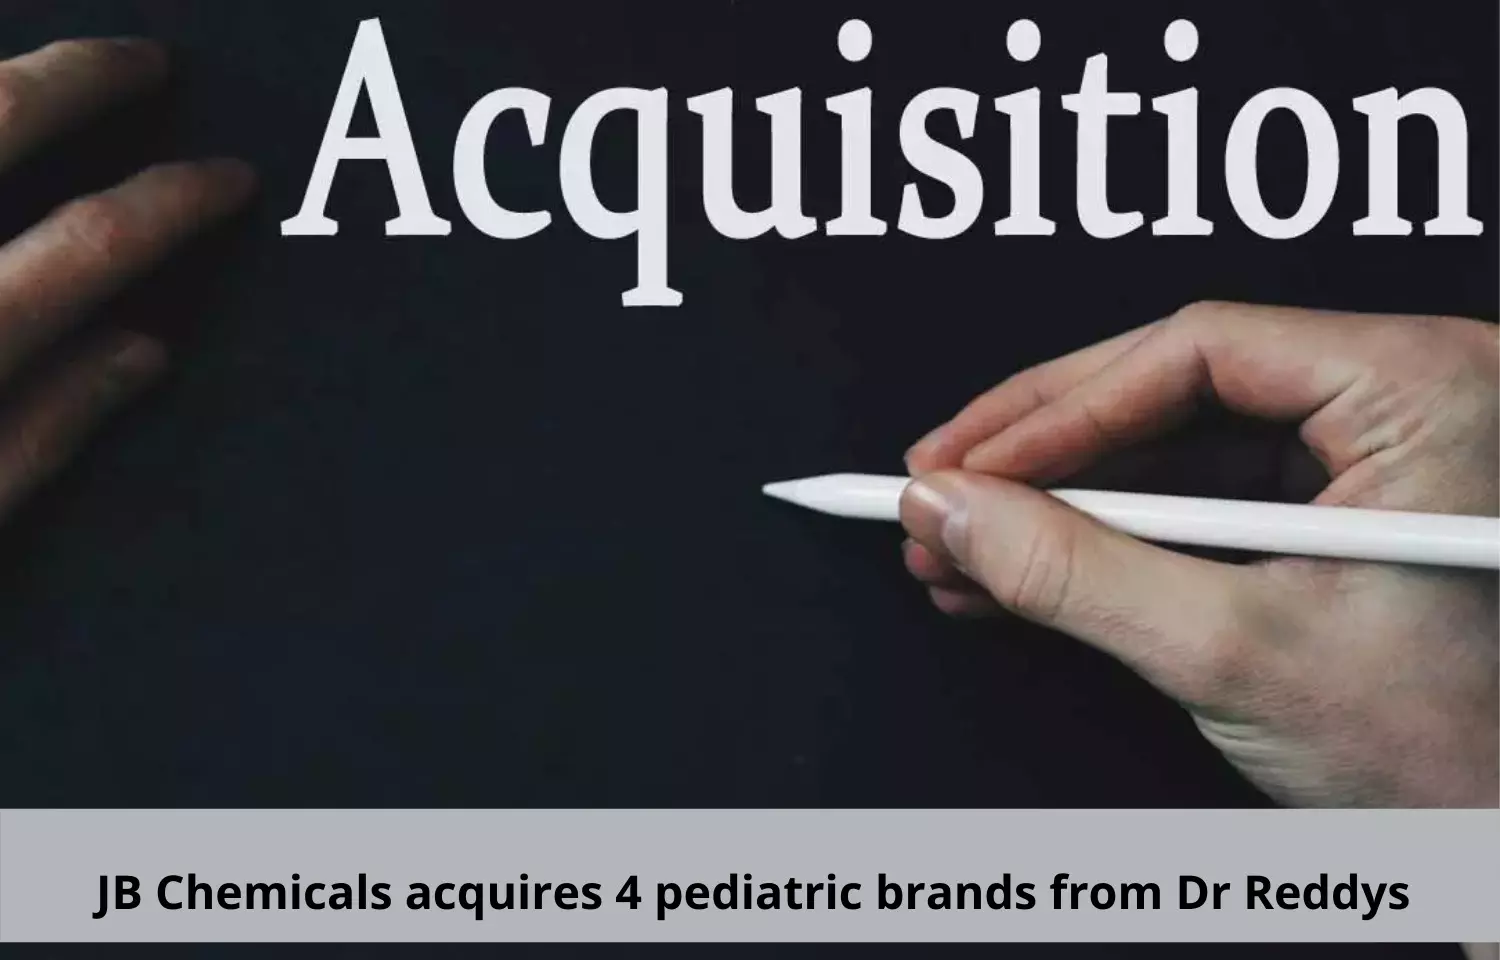 JB Chemicals acquires 4 pediatric brands from Dr Reddys